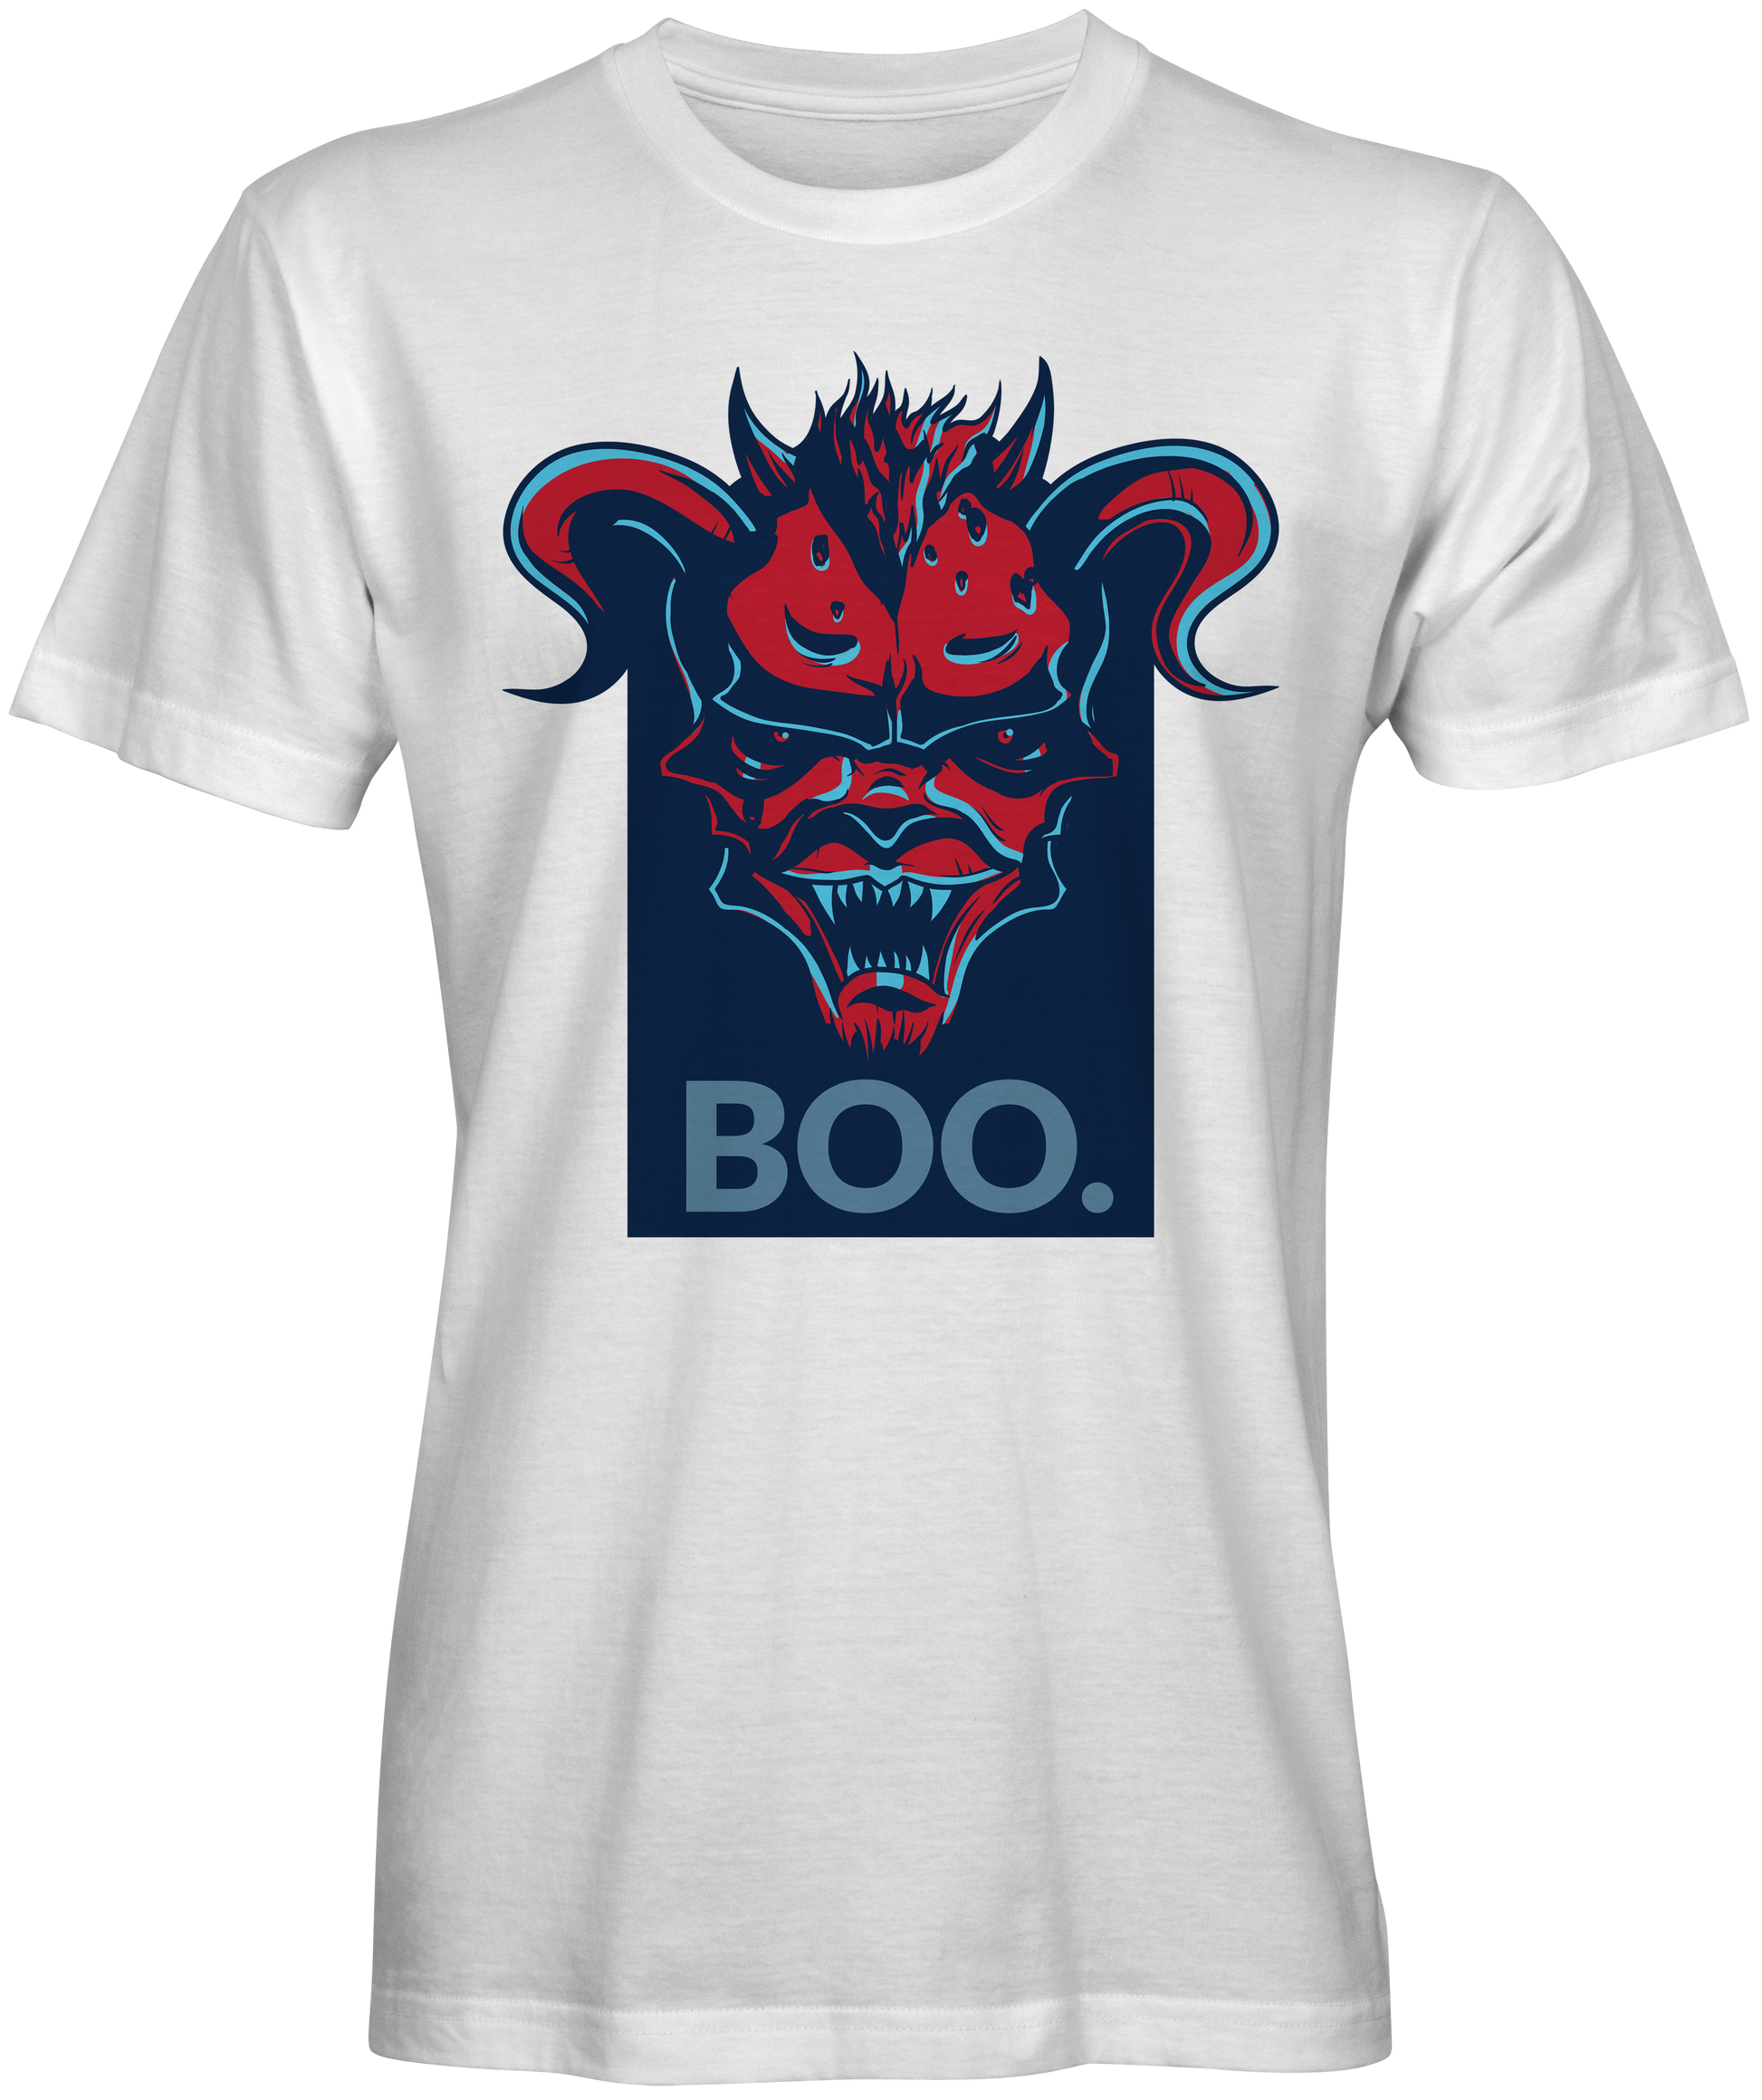  Boo Devil Graphic Tee for Sale